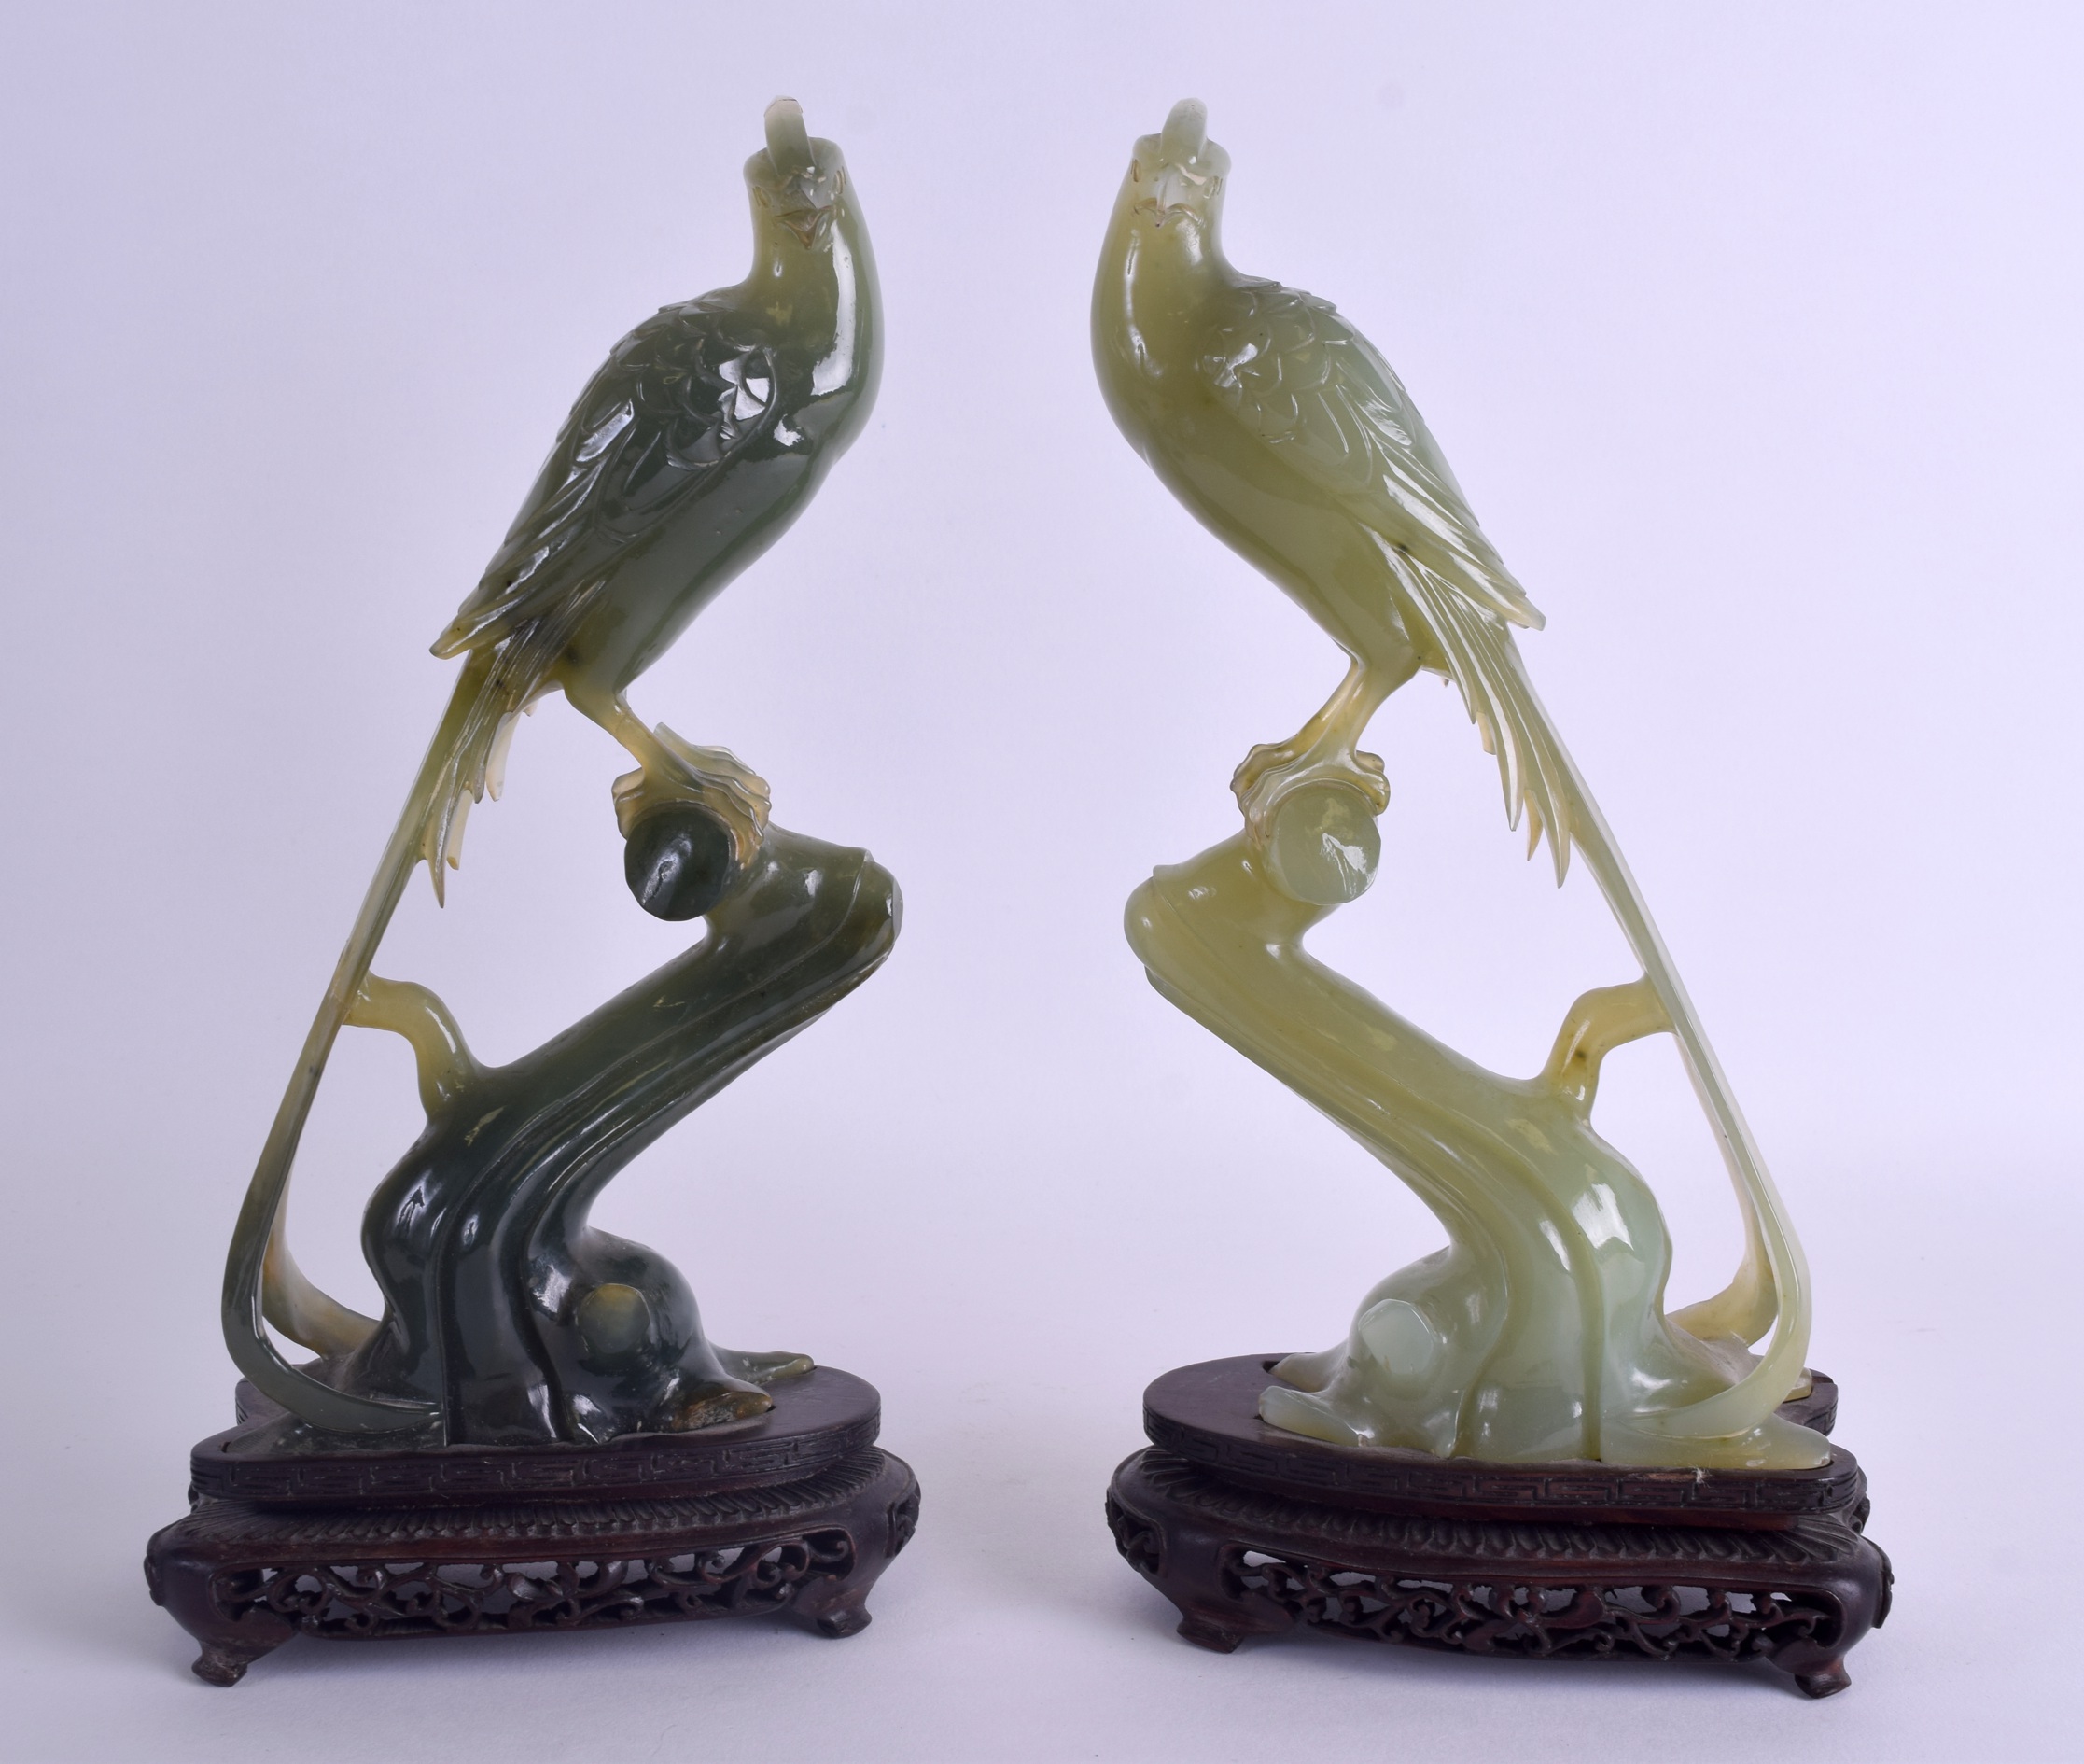 A LARGE PAIR OF 19TH CENTURY CHINESE CARVED JADE FIGURES OF BIRDS modelled upon naturalistic - Image 2 of 3